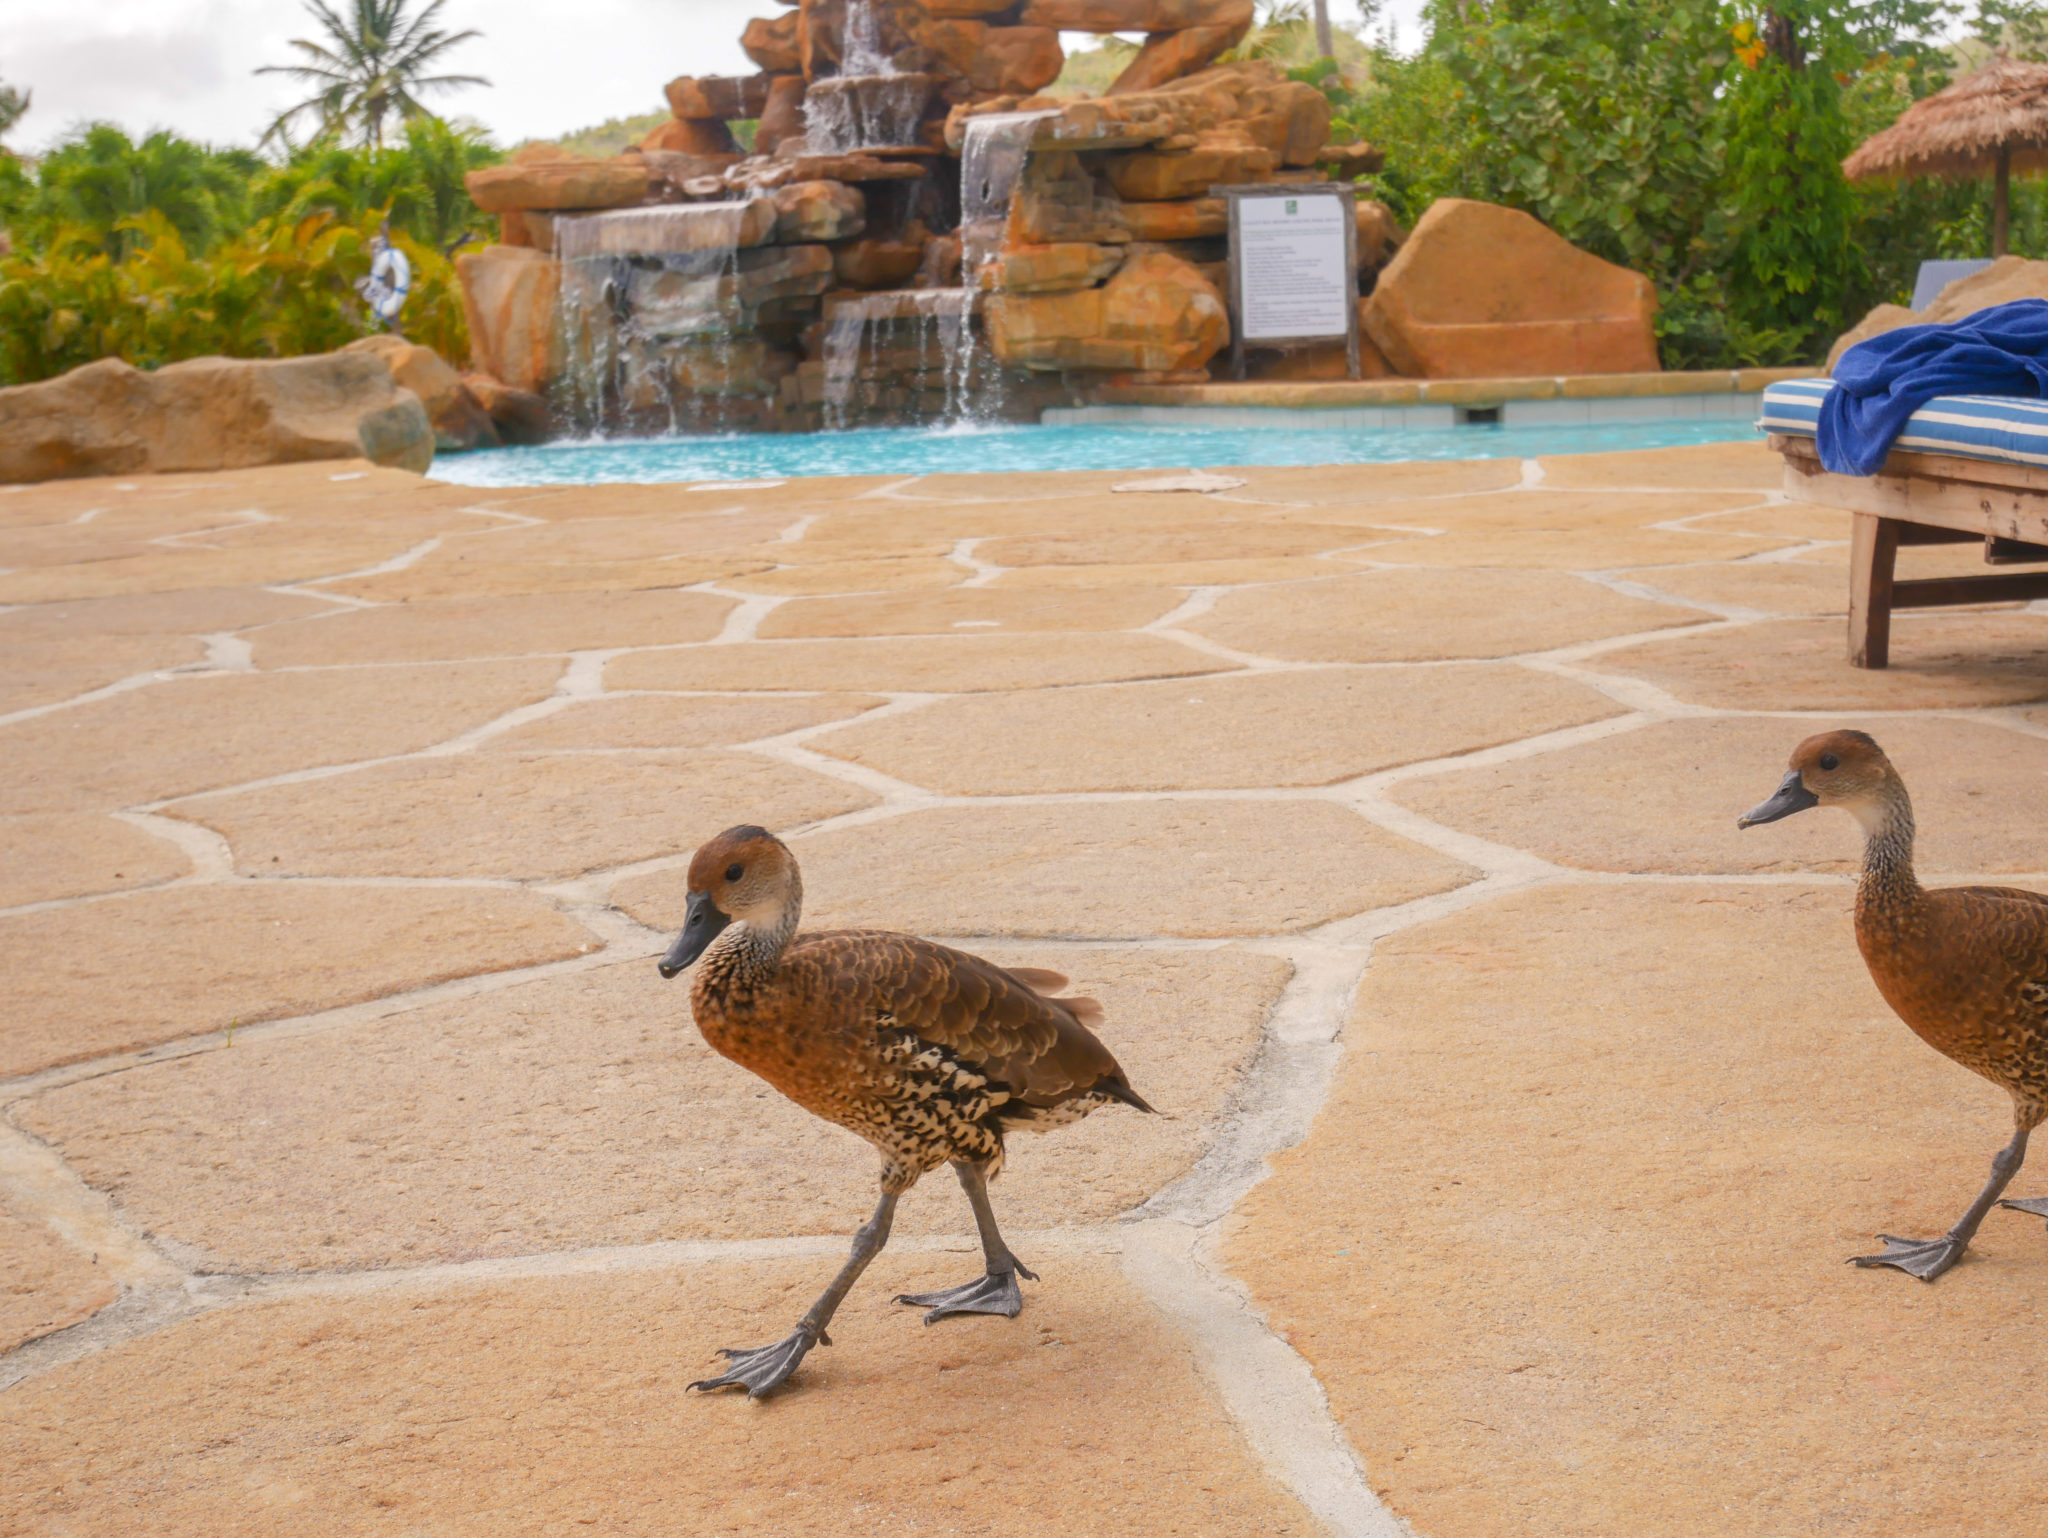 2 West Indian whistling ducks walking by the pool